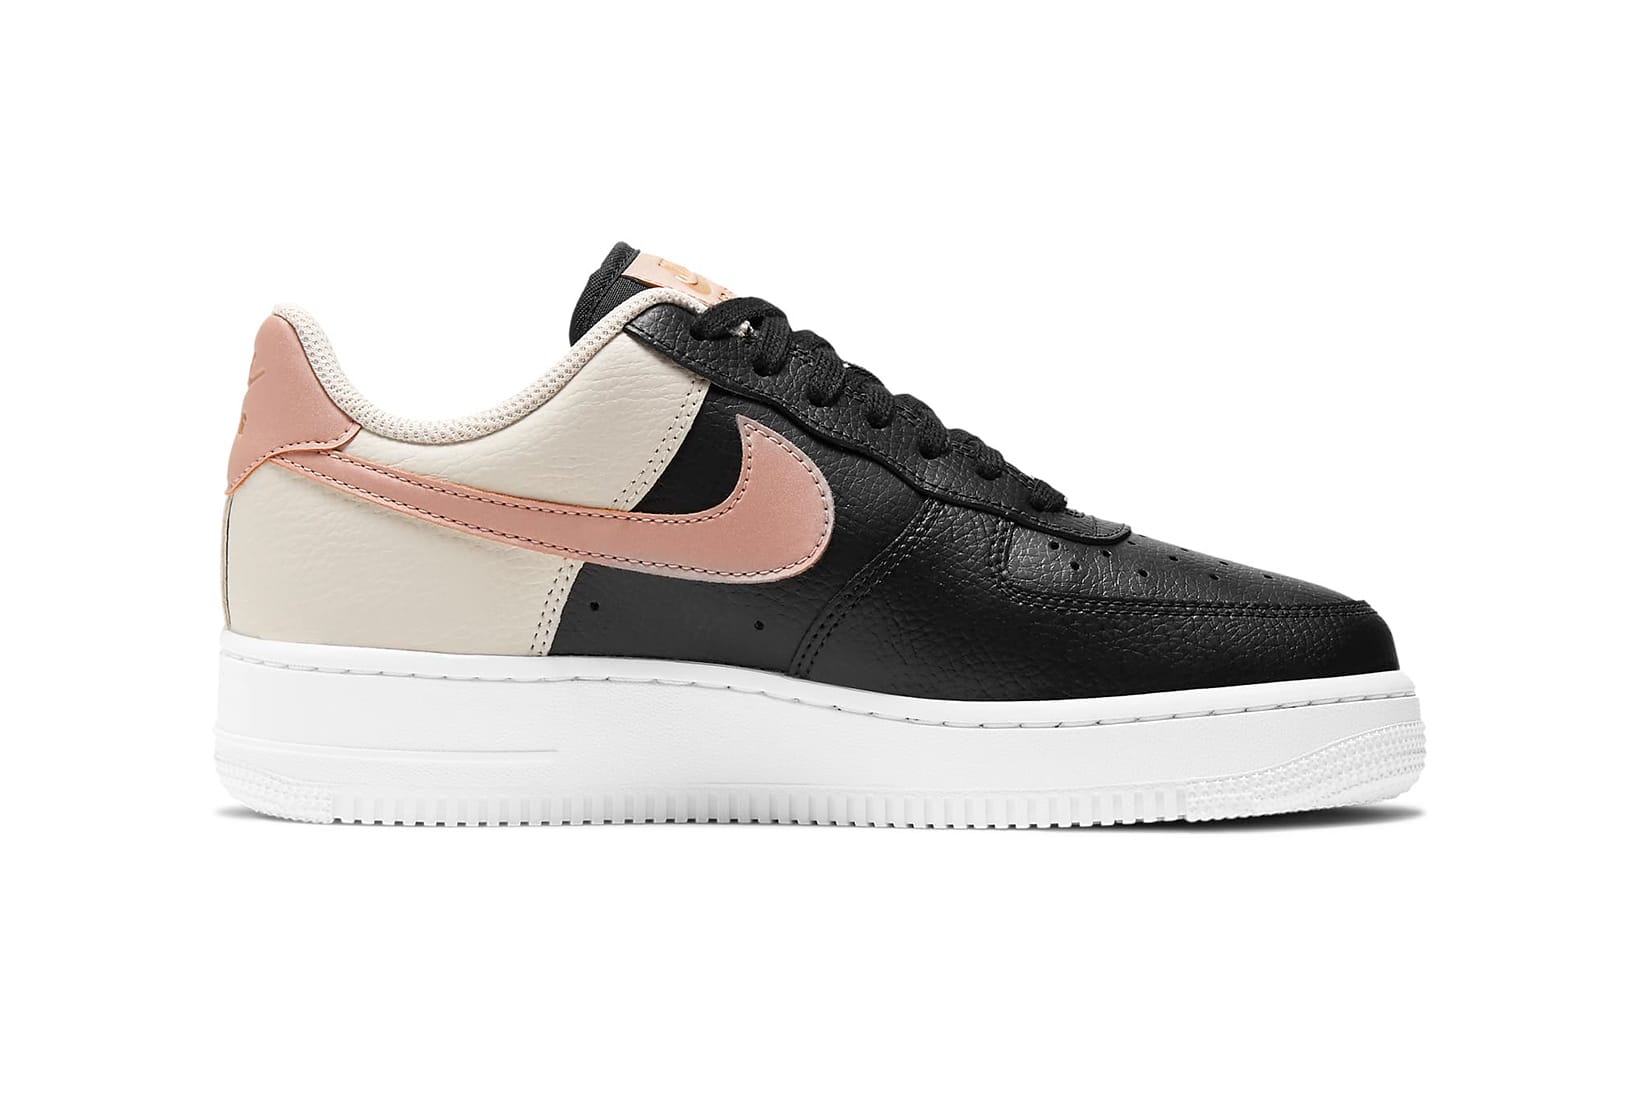 air force 1 pink black and white